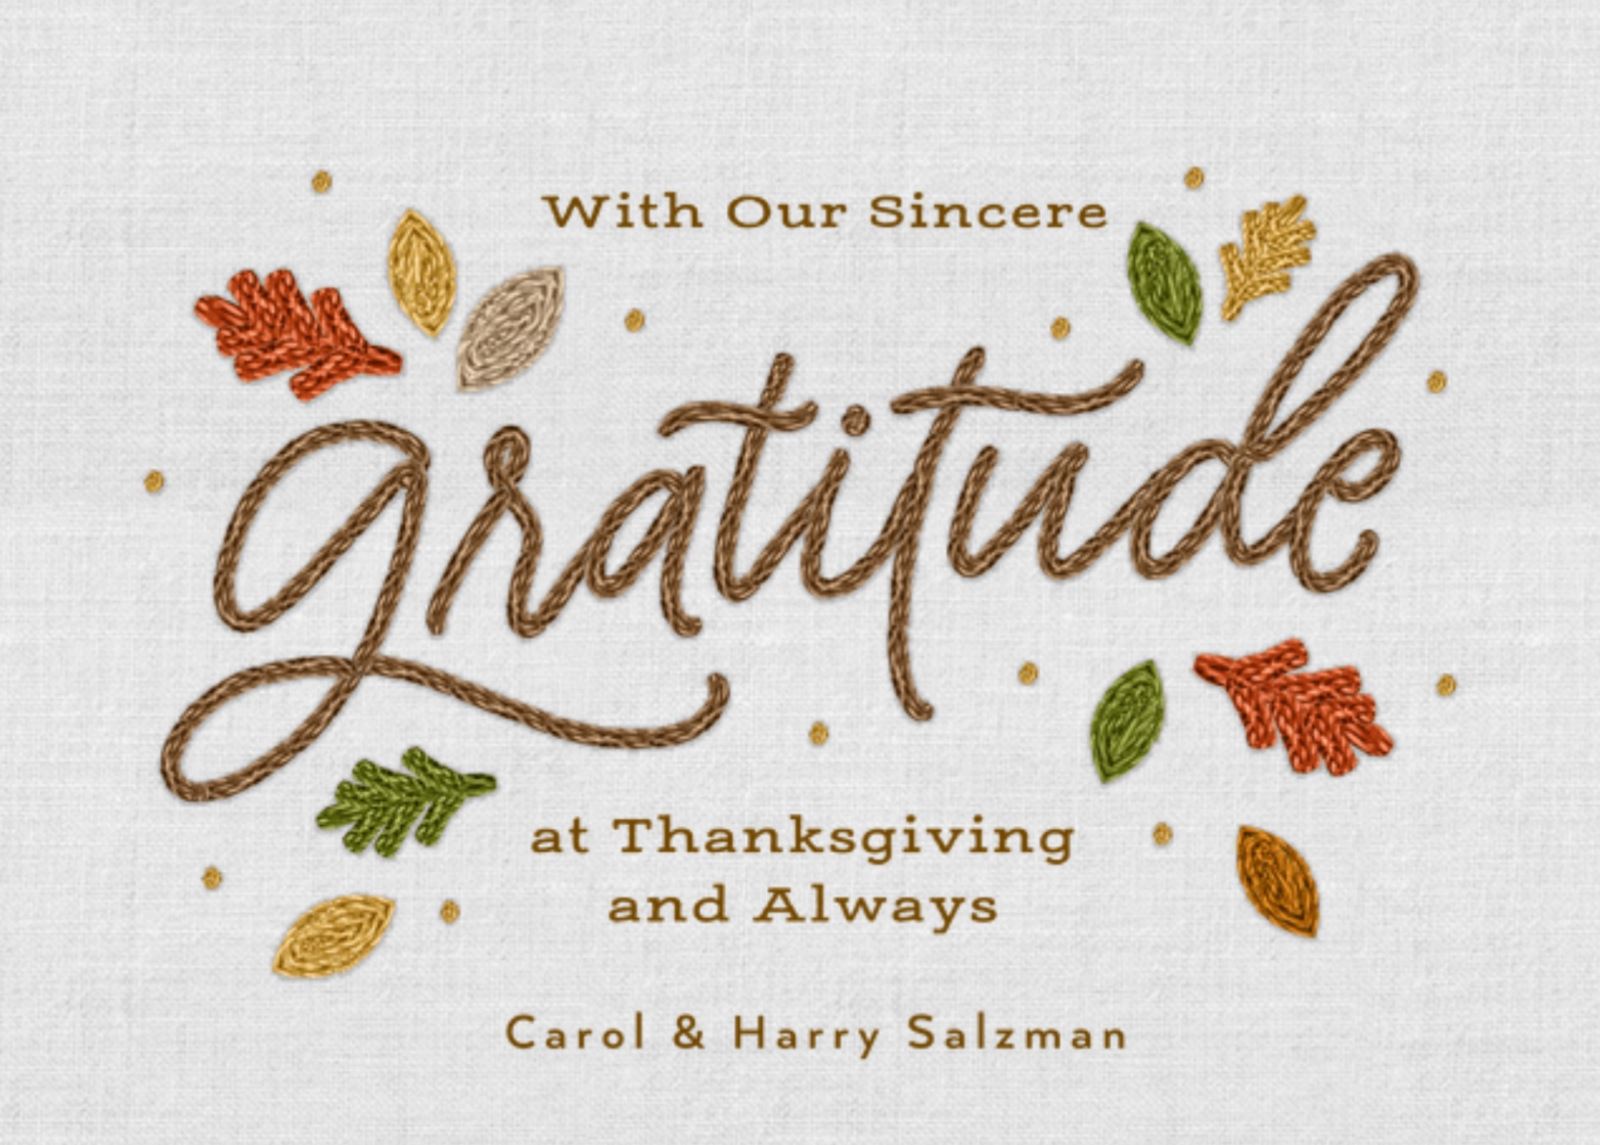 A thanksgiving card with text and leavesDescription automatically generated